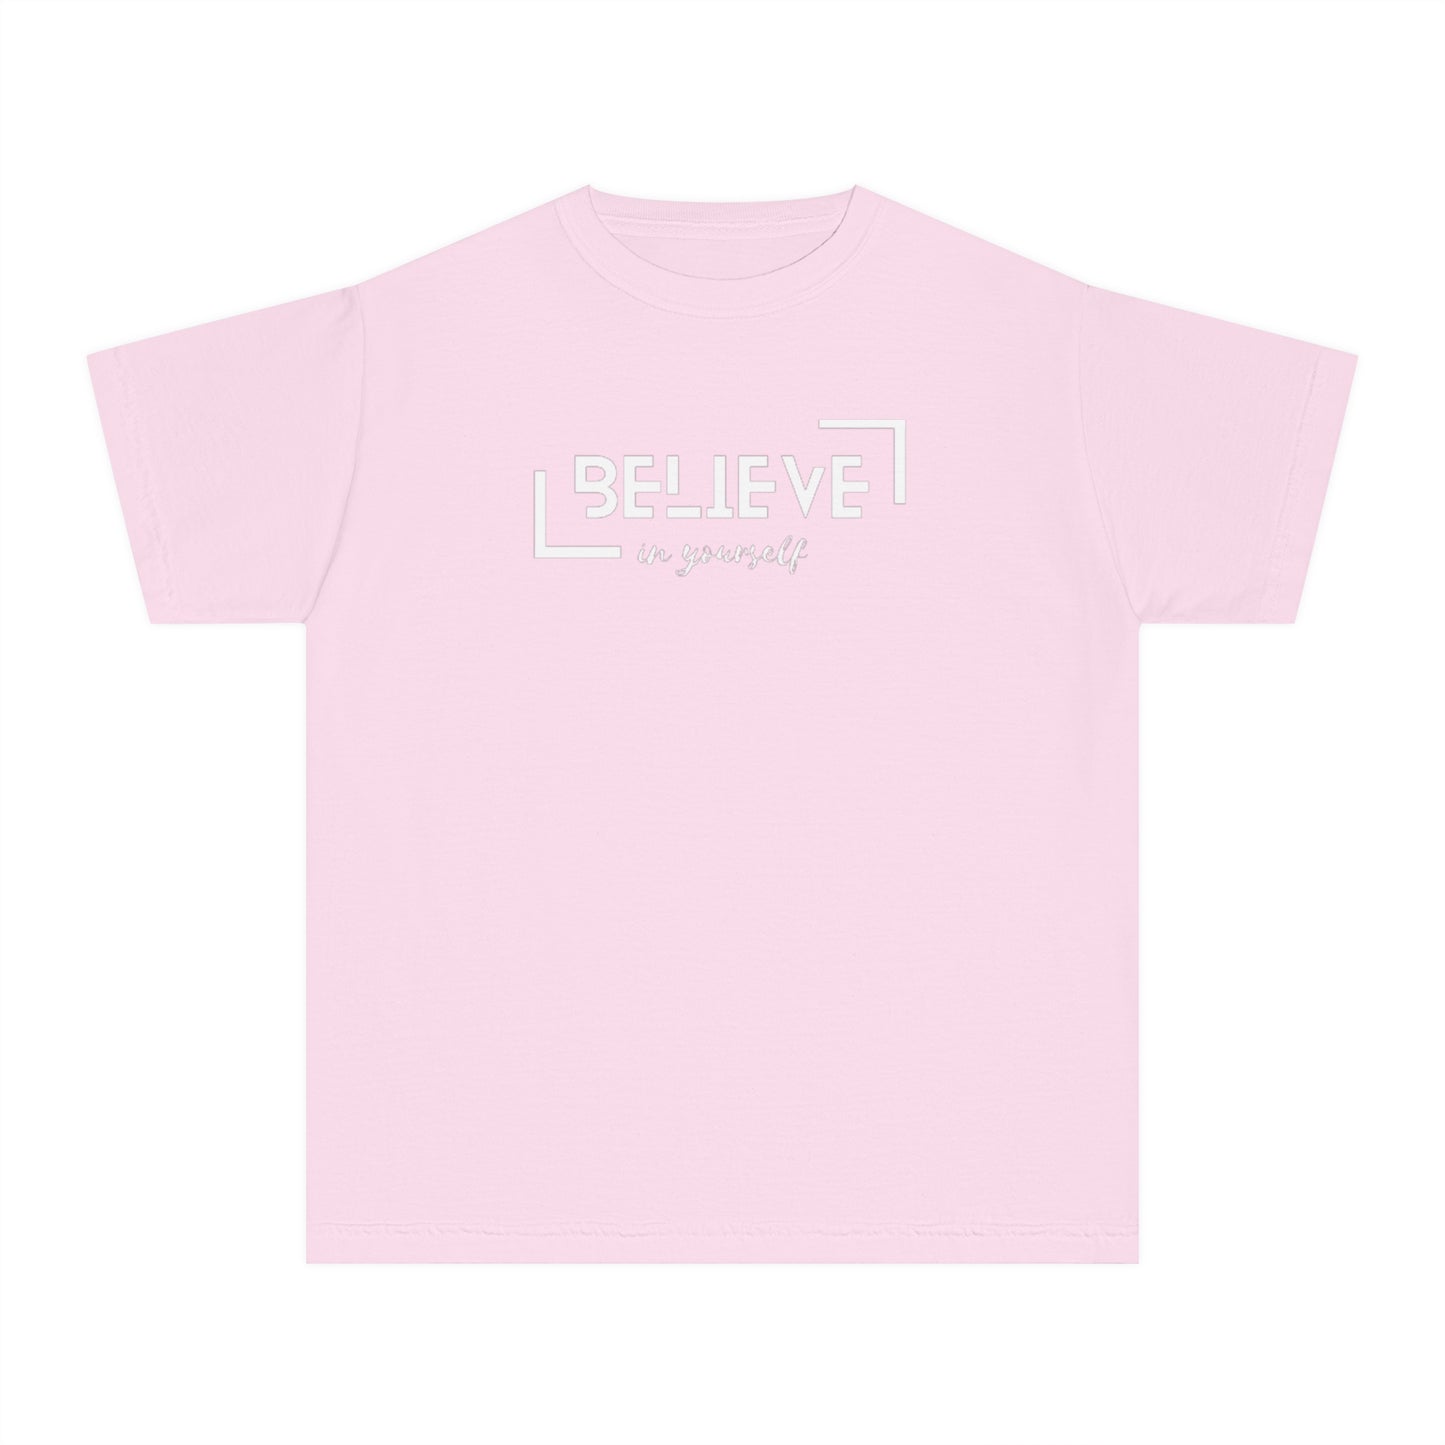 Believe in Yourself-Youth Midweight Tee